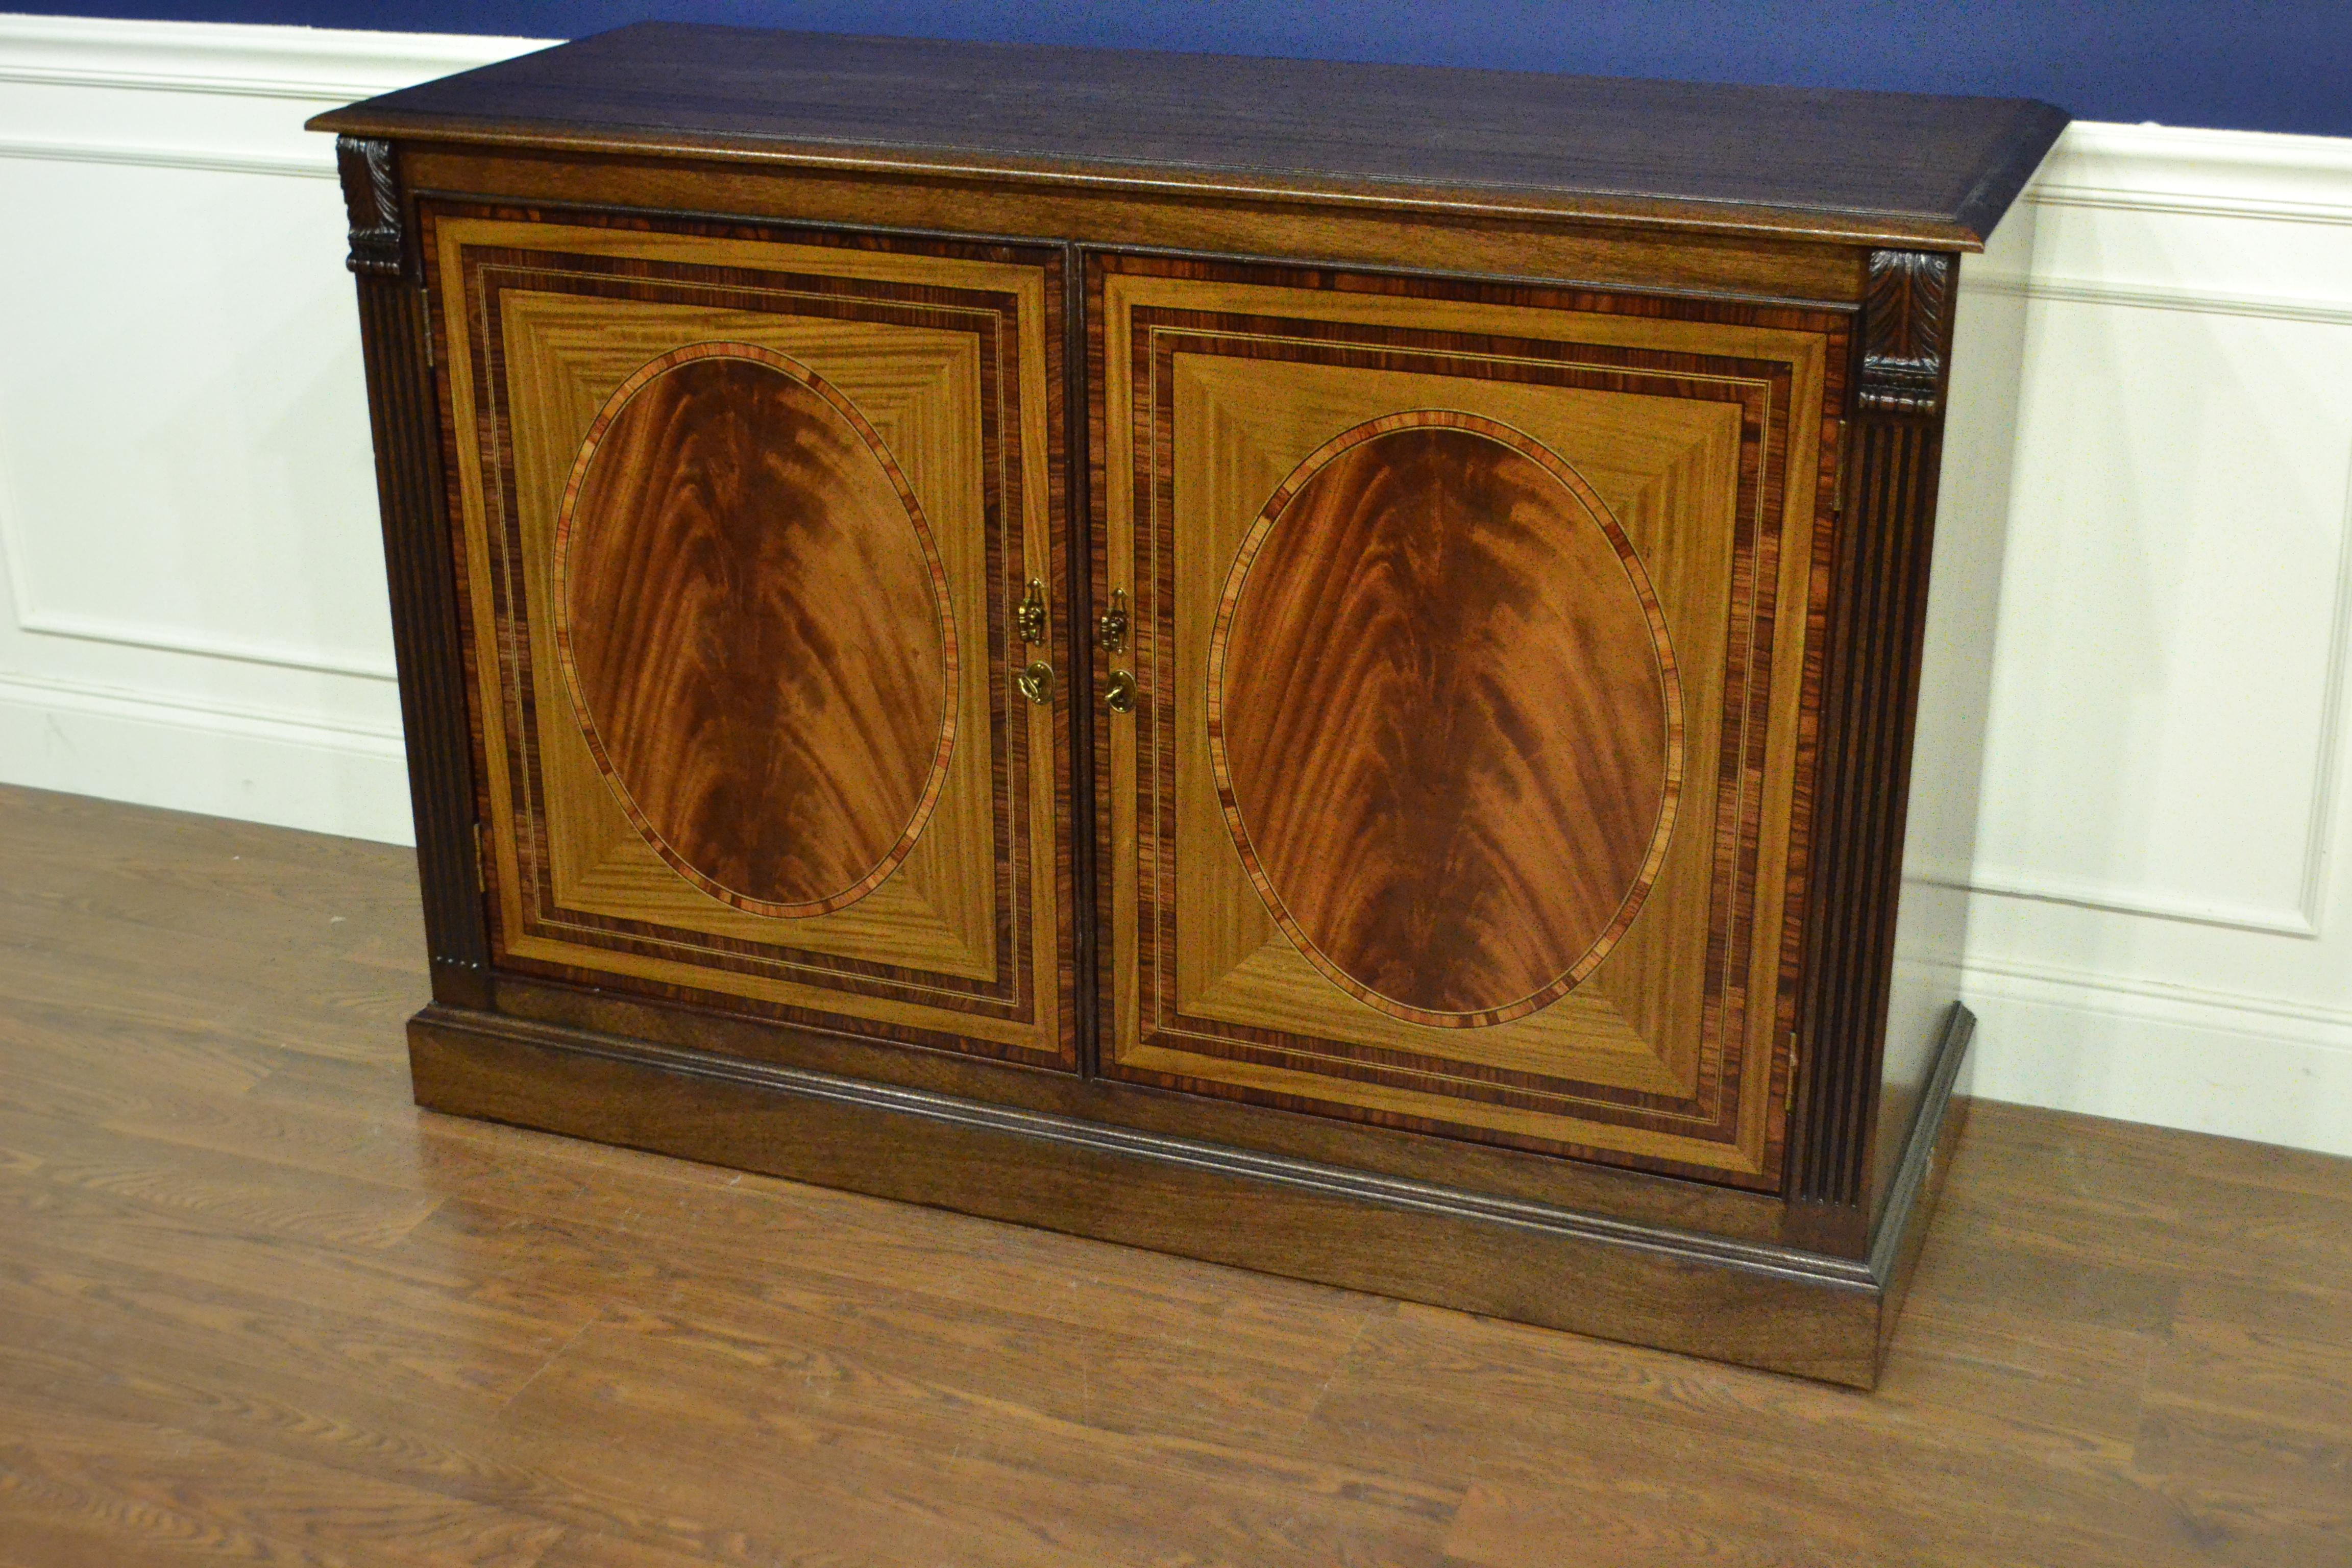 This is made-to-order traditional mahogany two-door buffet or credenza made in the Leighton Hall shop. It features two doors with swirly crotch mahogany fields and satinwood and santos rosewood borders. It has a cathedral mahogany top with a